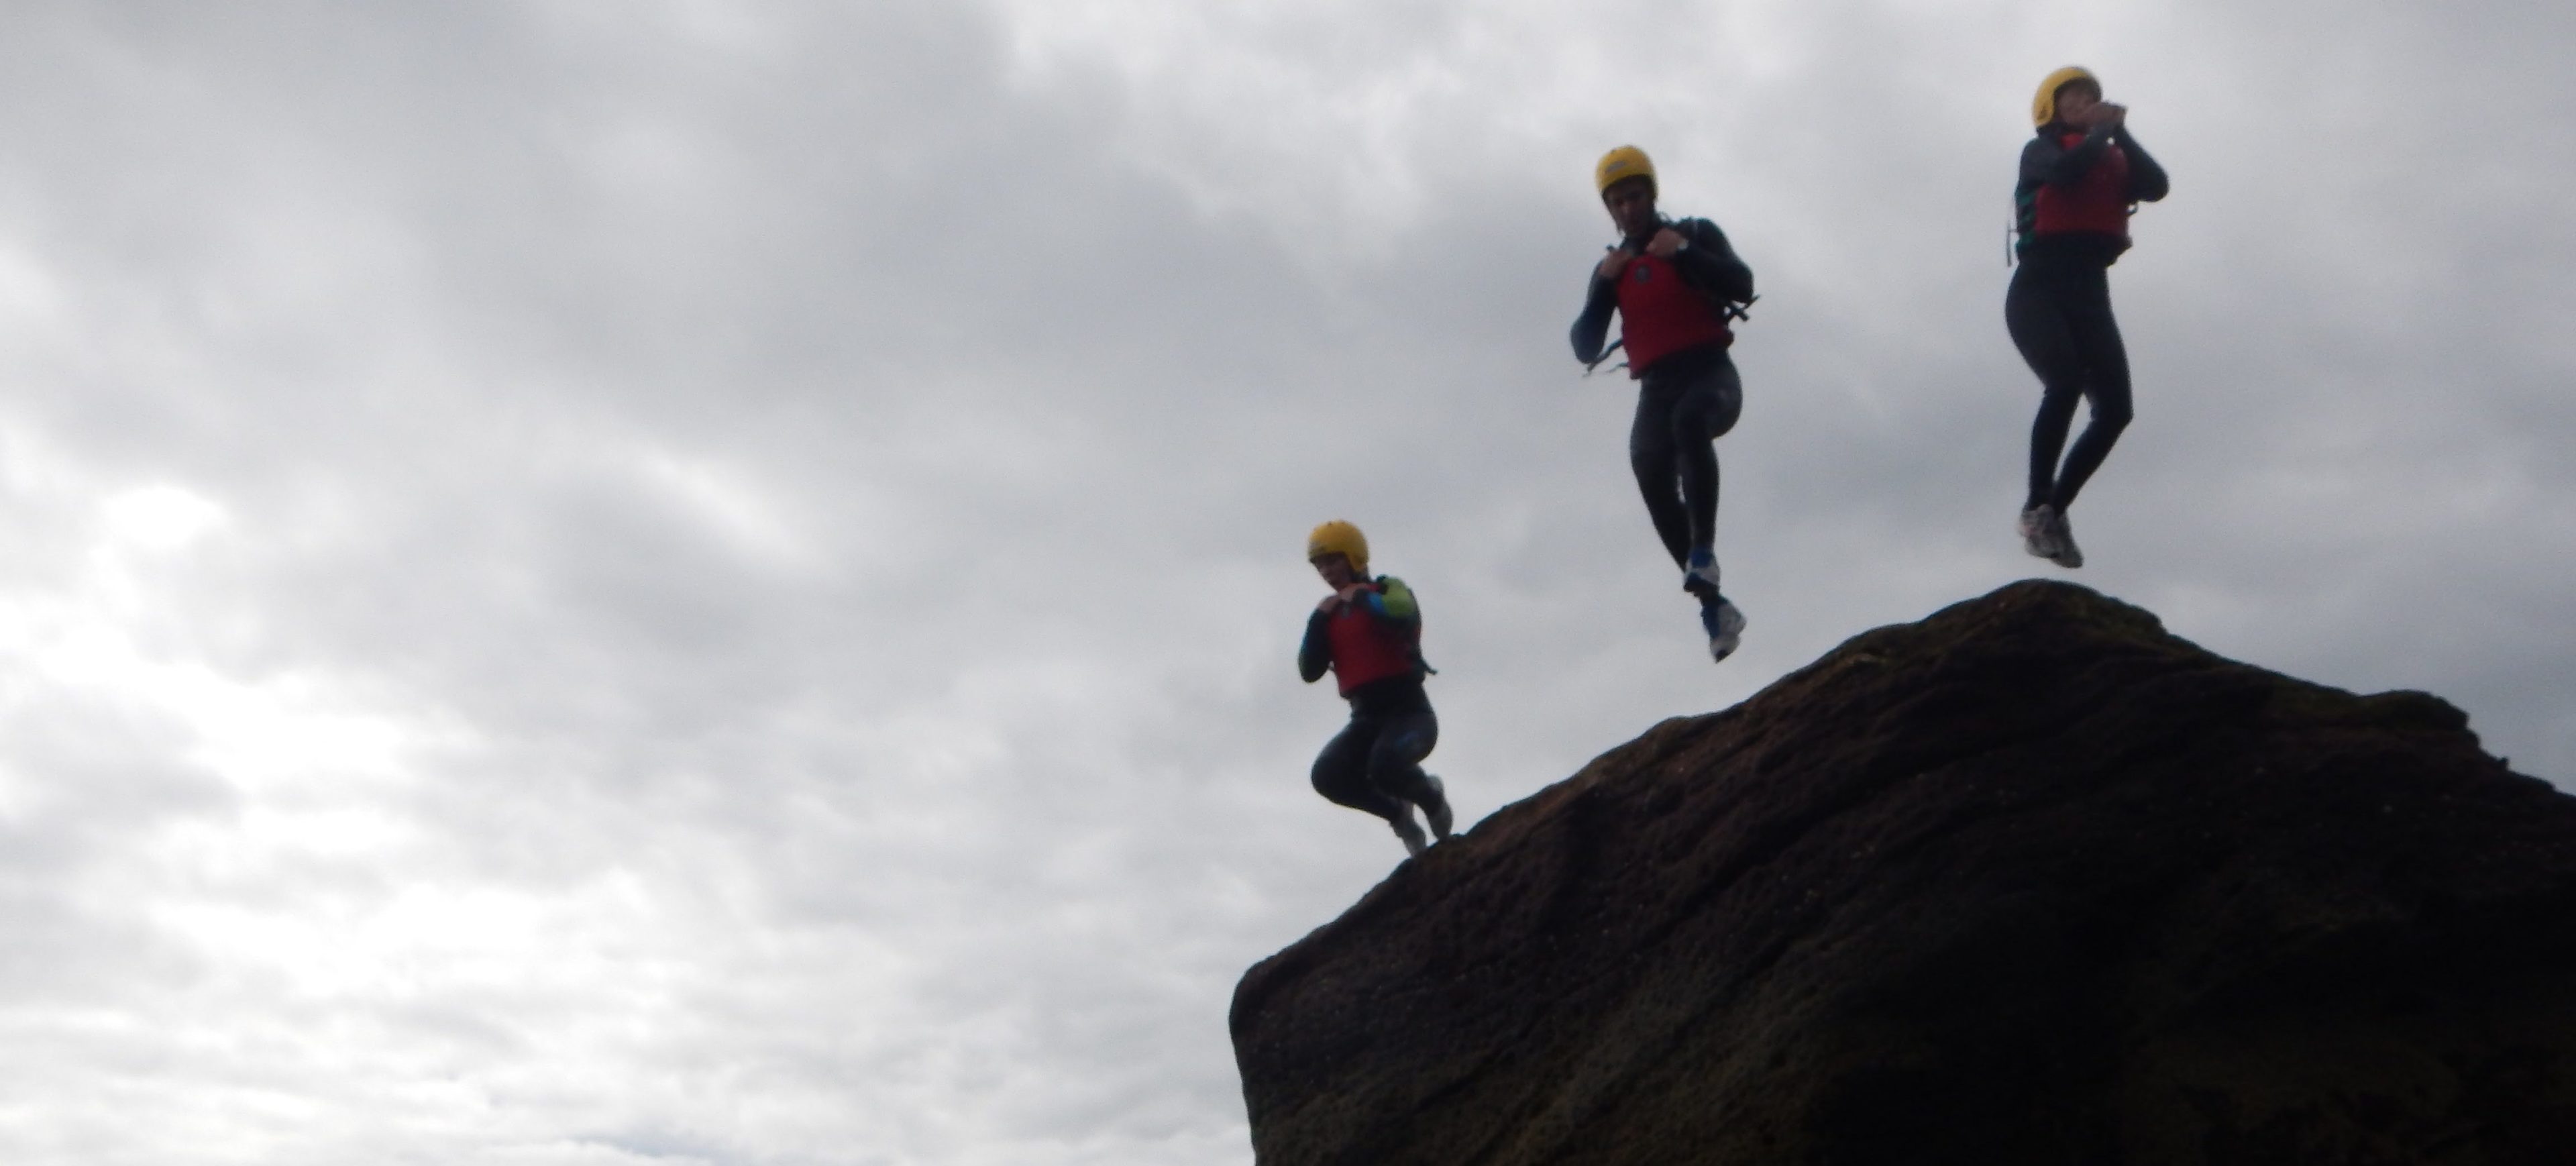 Coasteering with Vertical Descents is a huge buzz.